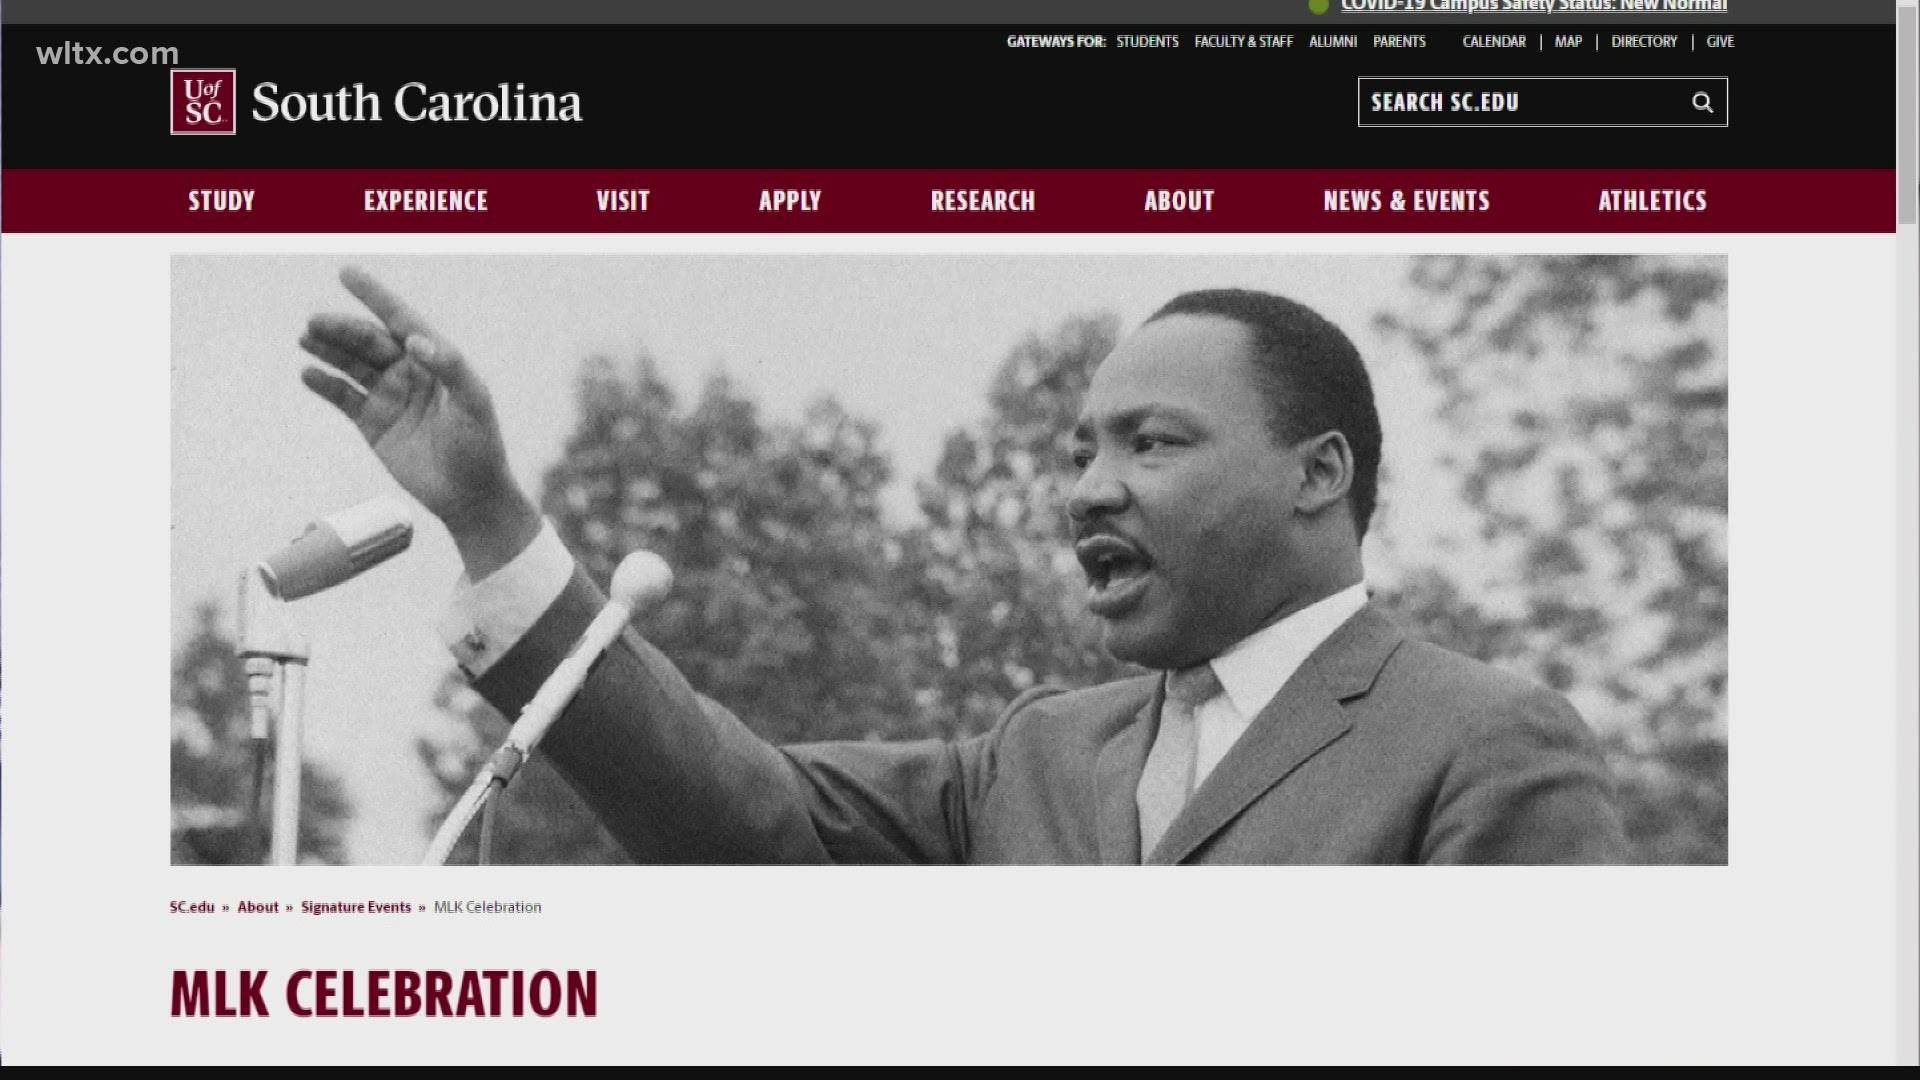 In light of the ongoing global pandemic, the University of South Carolina will celebrate the 2021 MLK Jr. holiday with a lineup of mostly virtual events.